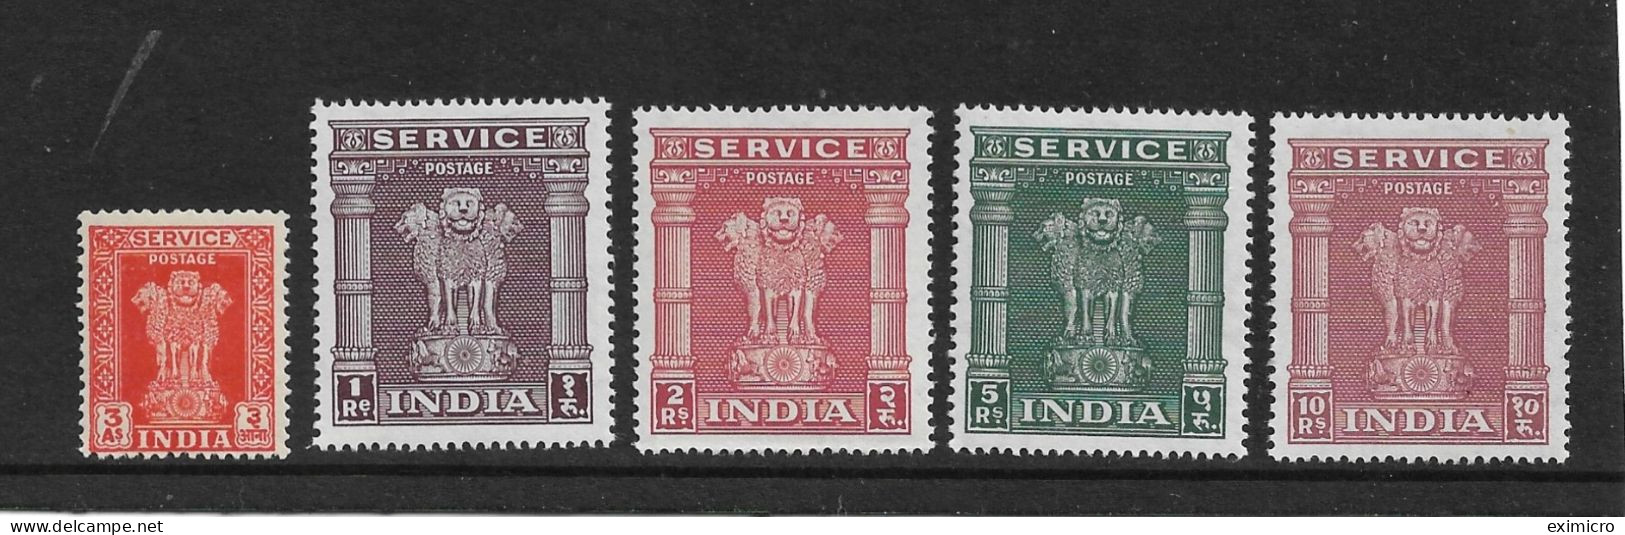 INDIA 1950 - 1951 OFFICIALS 3a, 1R - 10R SG O156, O161 - O164 UNMOUNTED MINT Cat £27.75 - Official Stamps